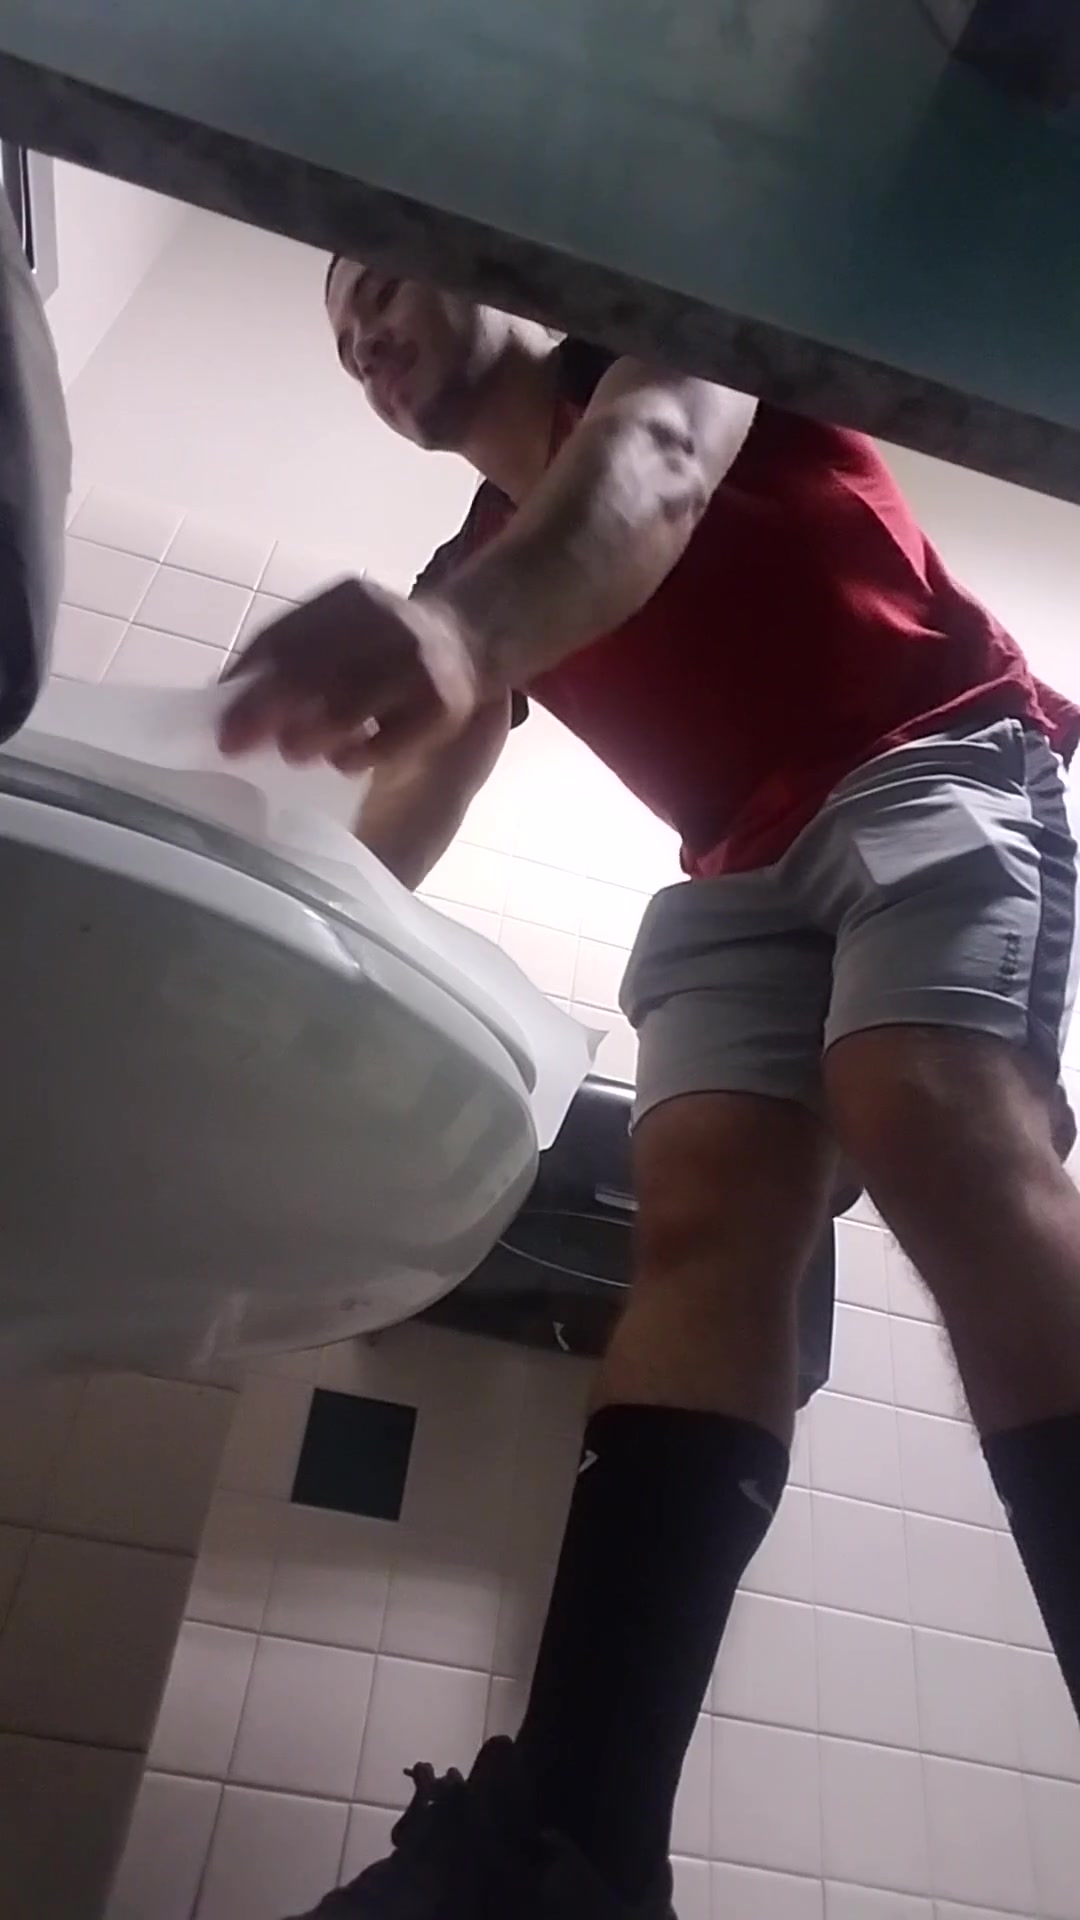 guy with perfect ass shitting - so fucking hot!